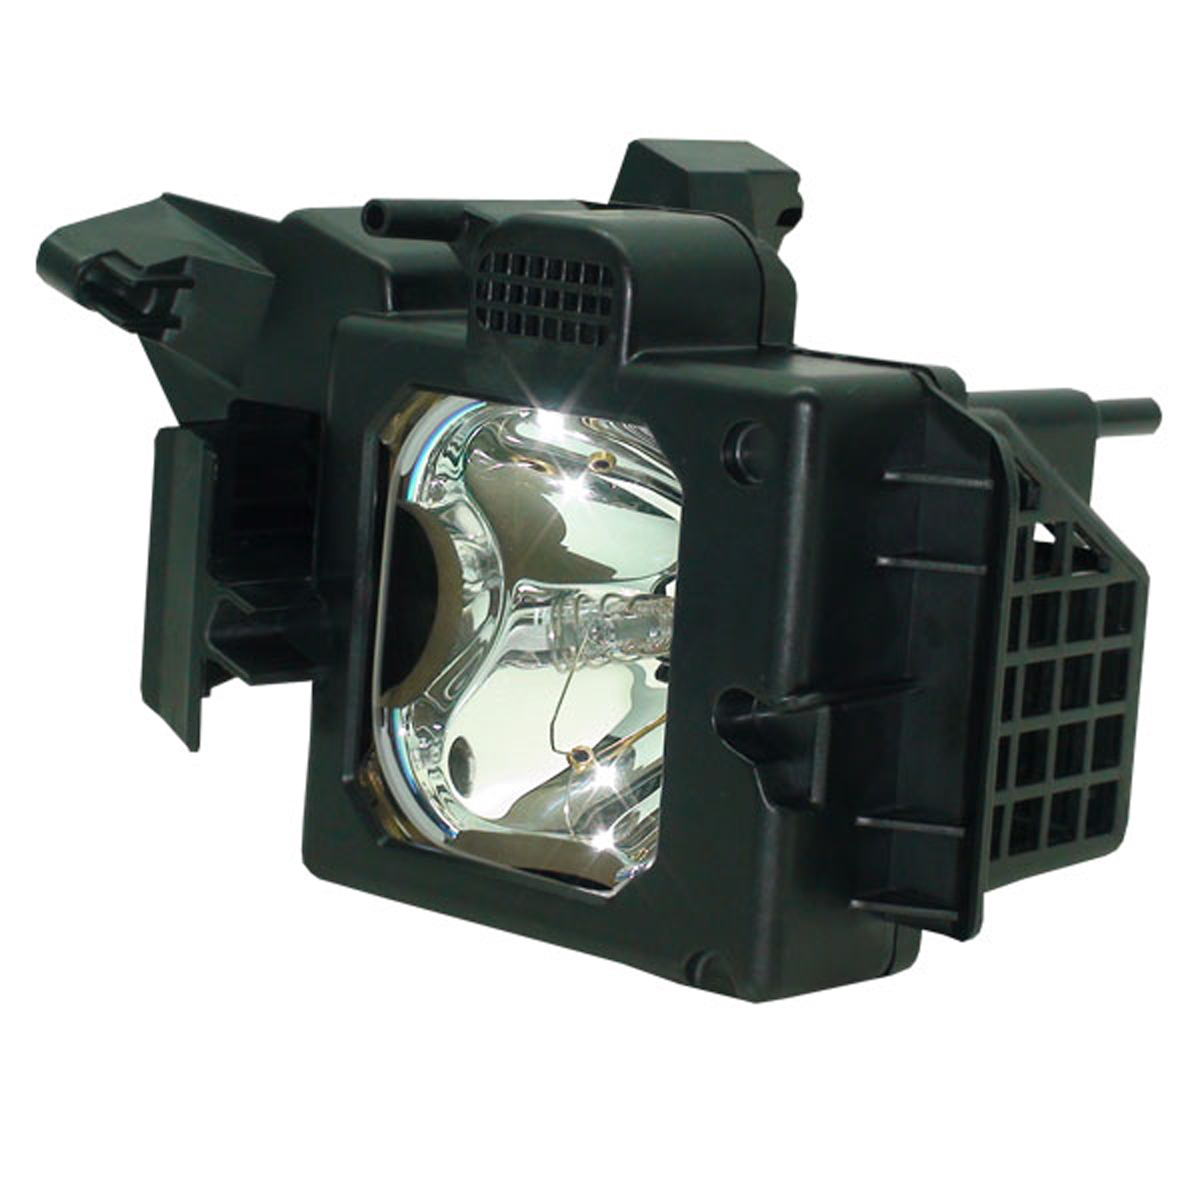 F93087500 / A1129776A / XL-2400 / A1127024A Lamp for SONY KDF 55E2000